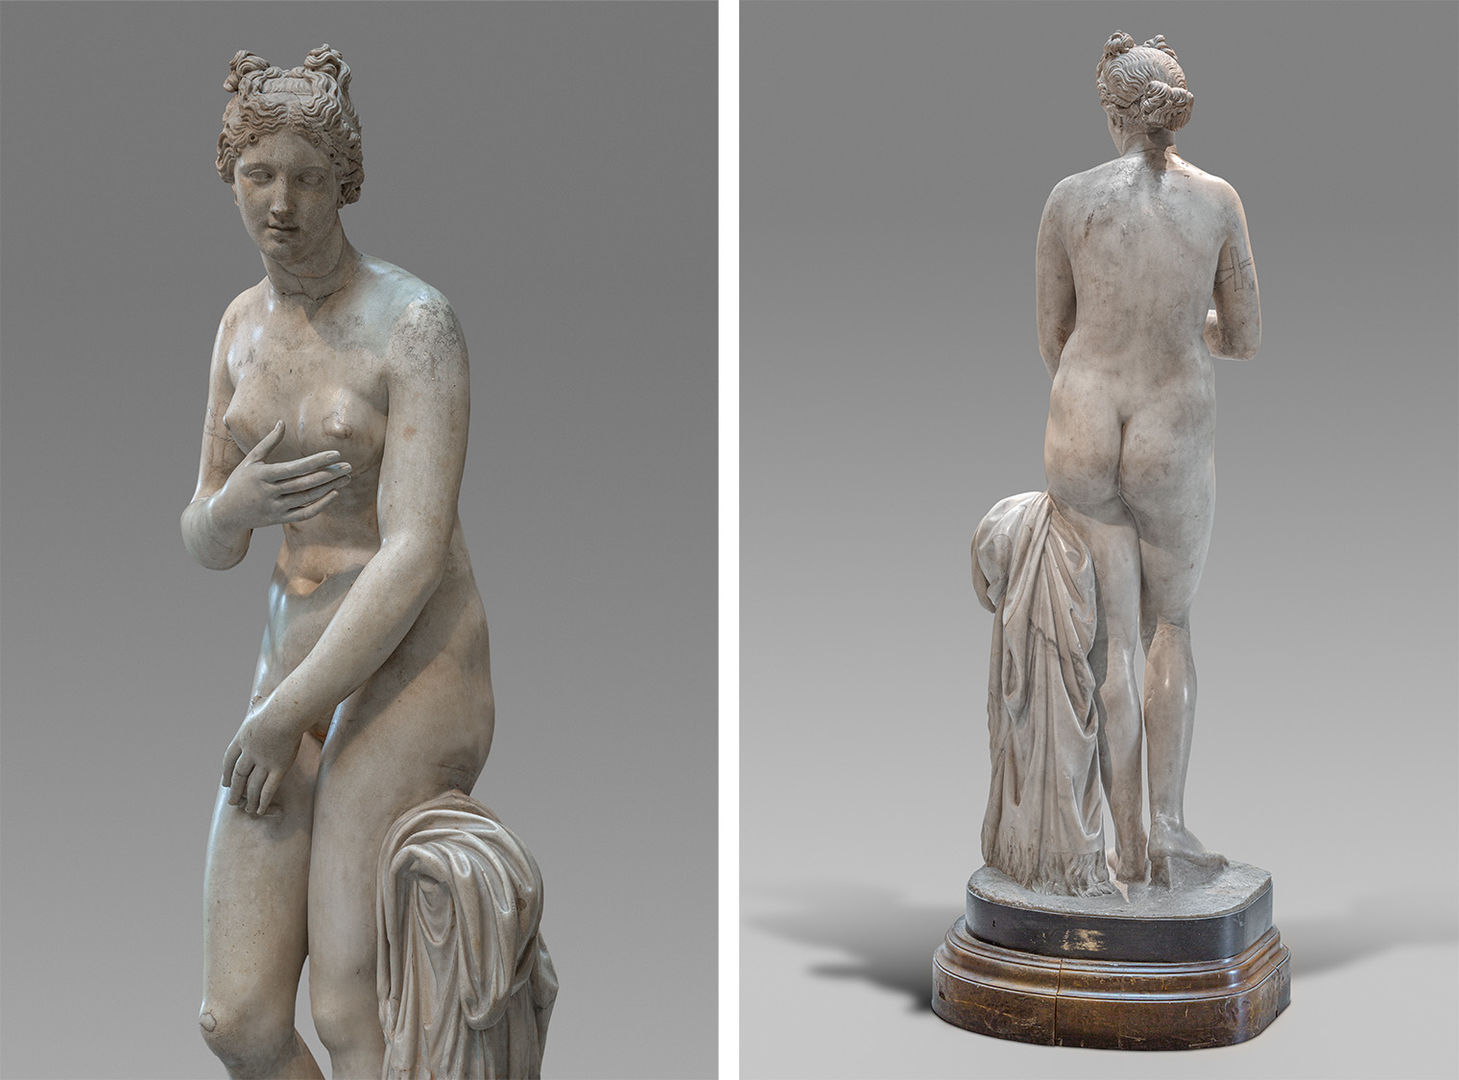 On left: Three quarters view of marble statue of Aphrodite. Her right hand moves to hide her breasts while her left hand covers her pubic area. On right: View of marble statue of Aphrodite from behind.